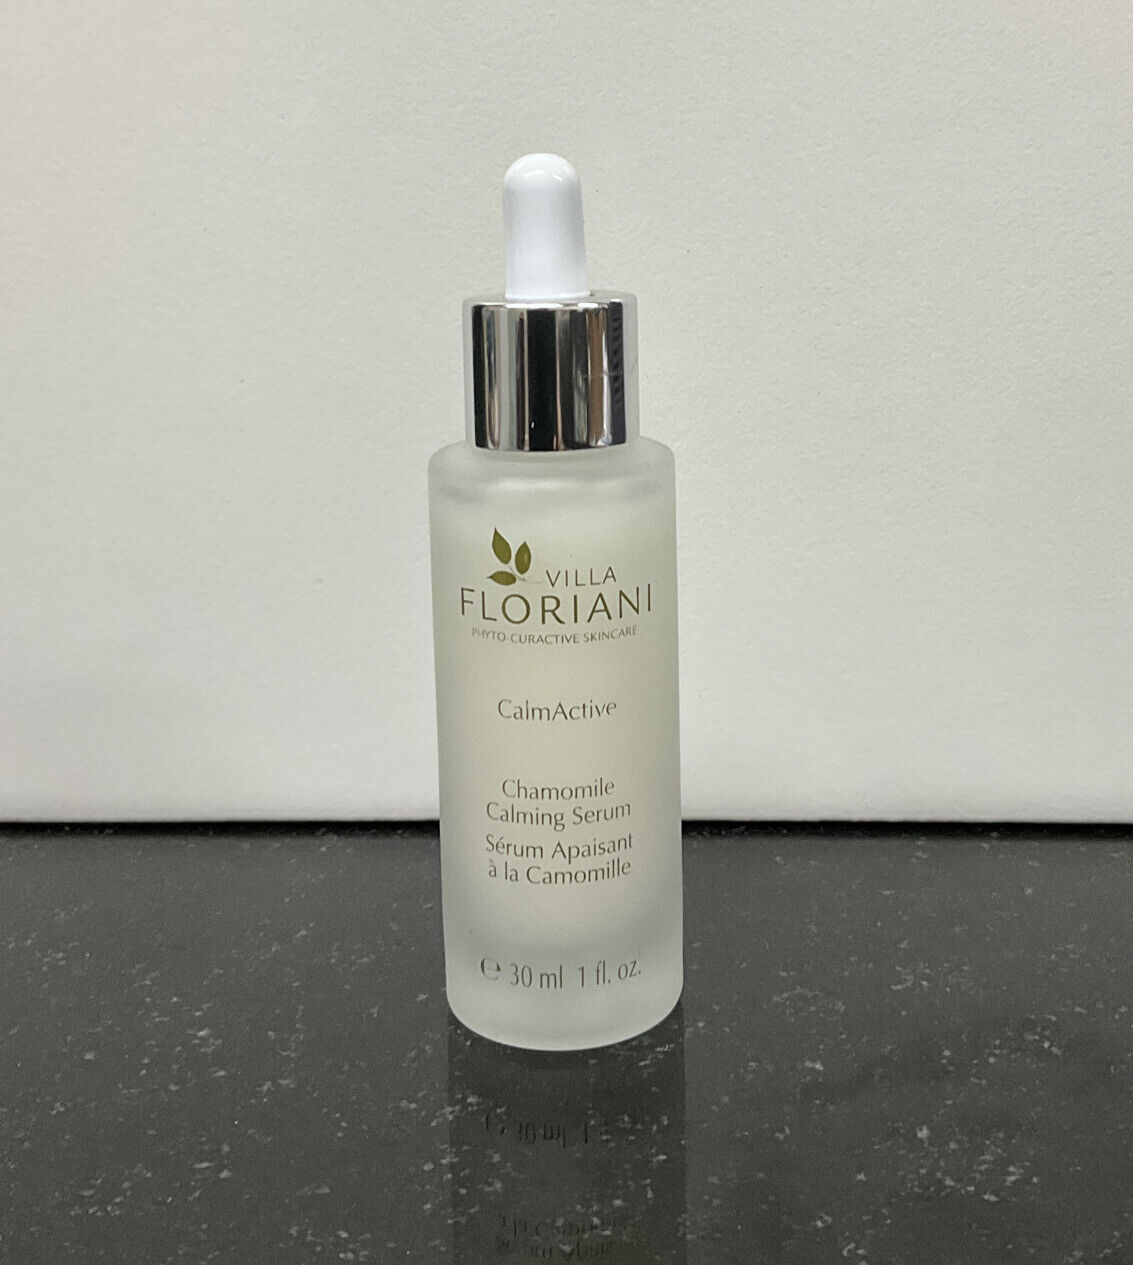 Calming Serum - Chamomile by Villa Floriani - 1 oz as pictured